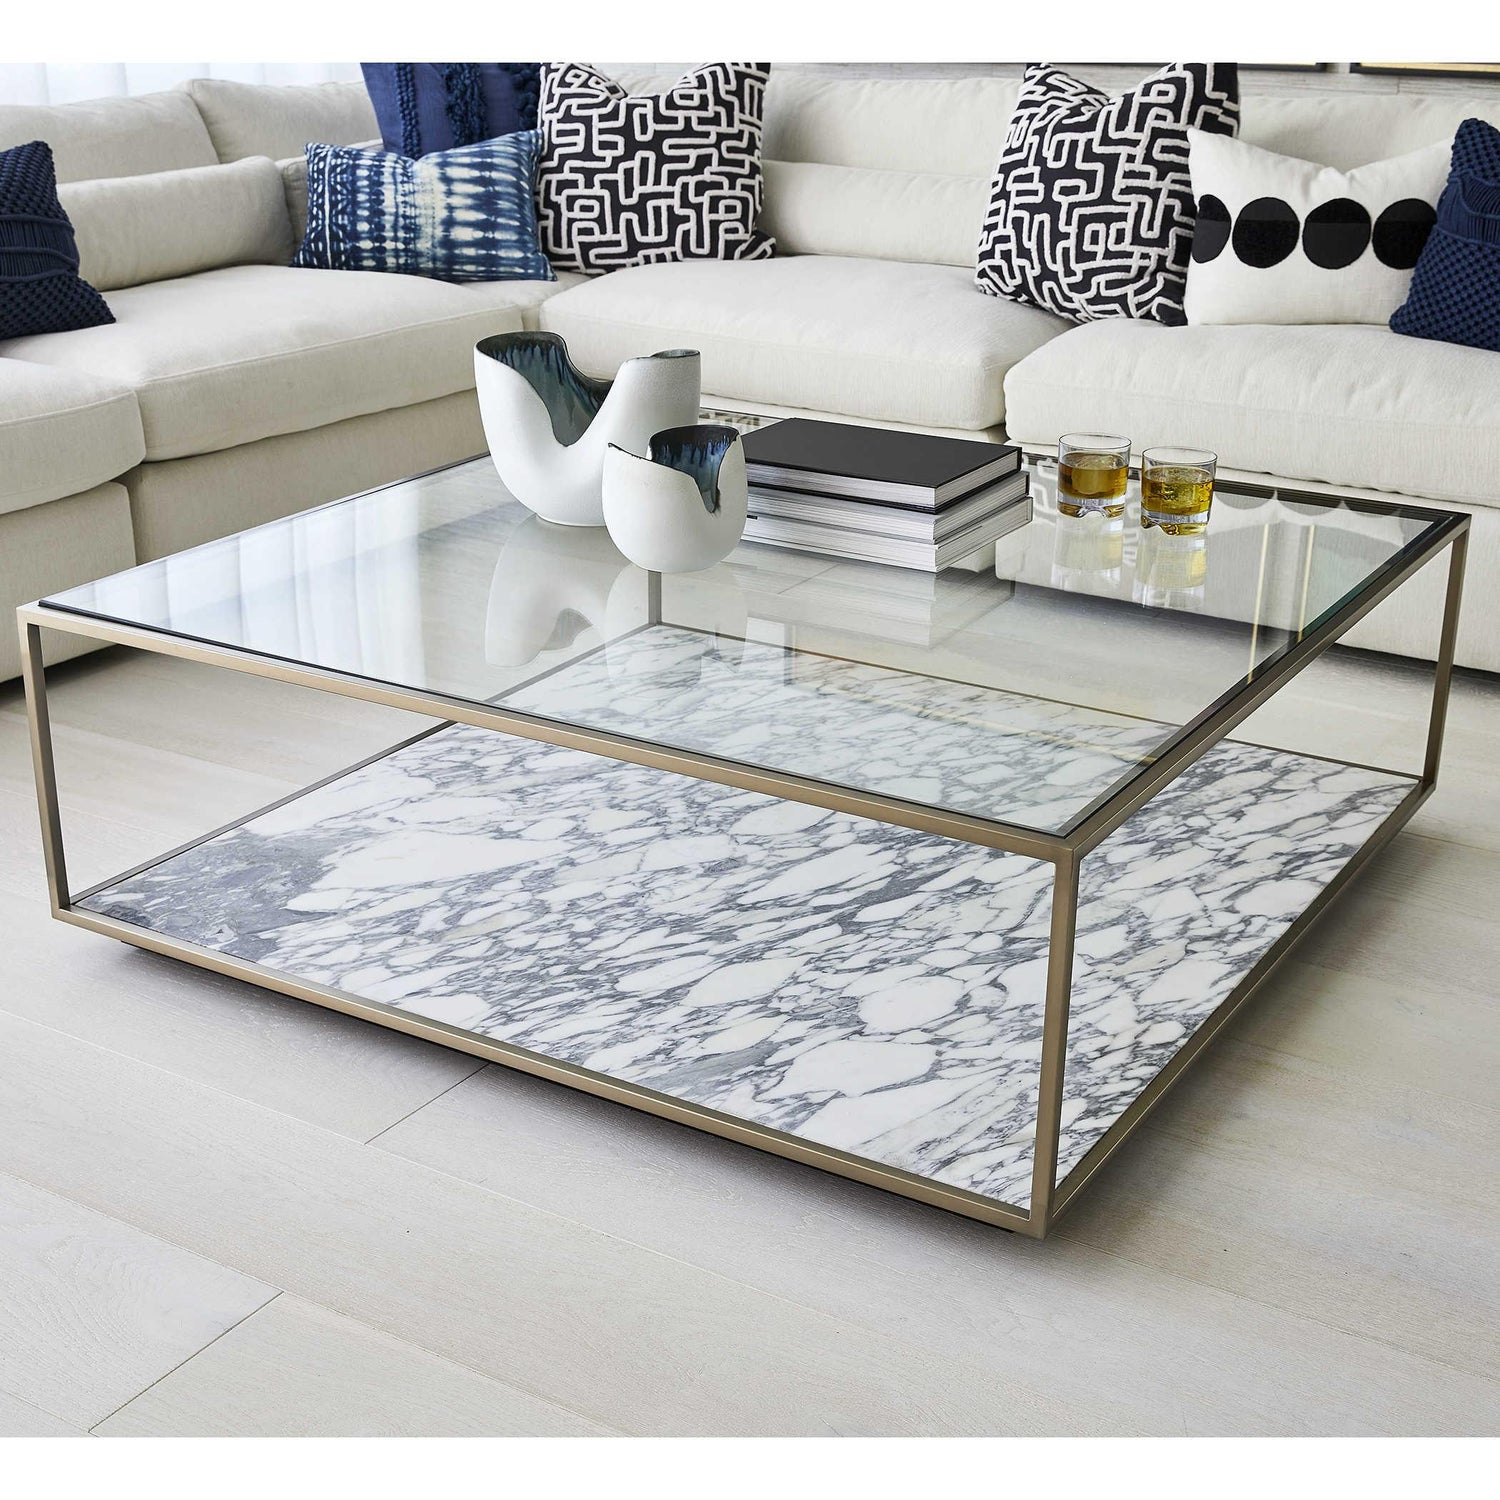 Black Label Floating Plane Coffee Table - Marble/Brass